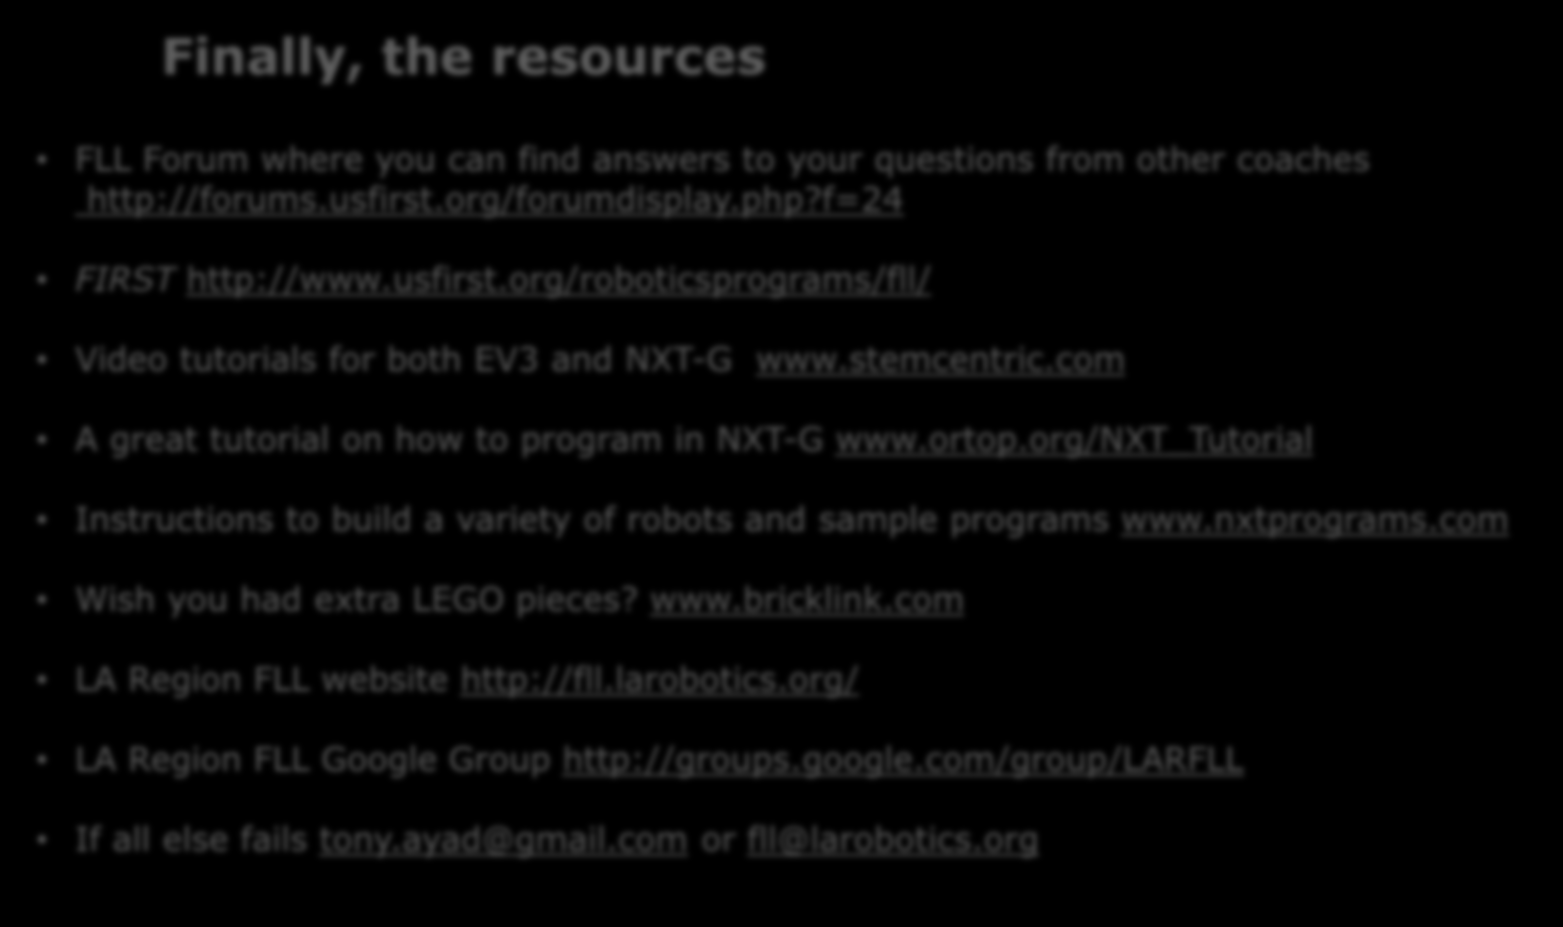 Finally, the resources FLL Forum where you can find answers to your questions from other coaches http://forums.usfirst.org/forumdisplay.php?f=24 FIRST http://www.usfirst.org/roboticsprograms/fll/ Video tutorials for both EV3 and NXT-G www.